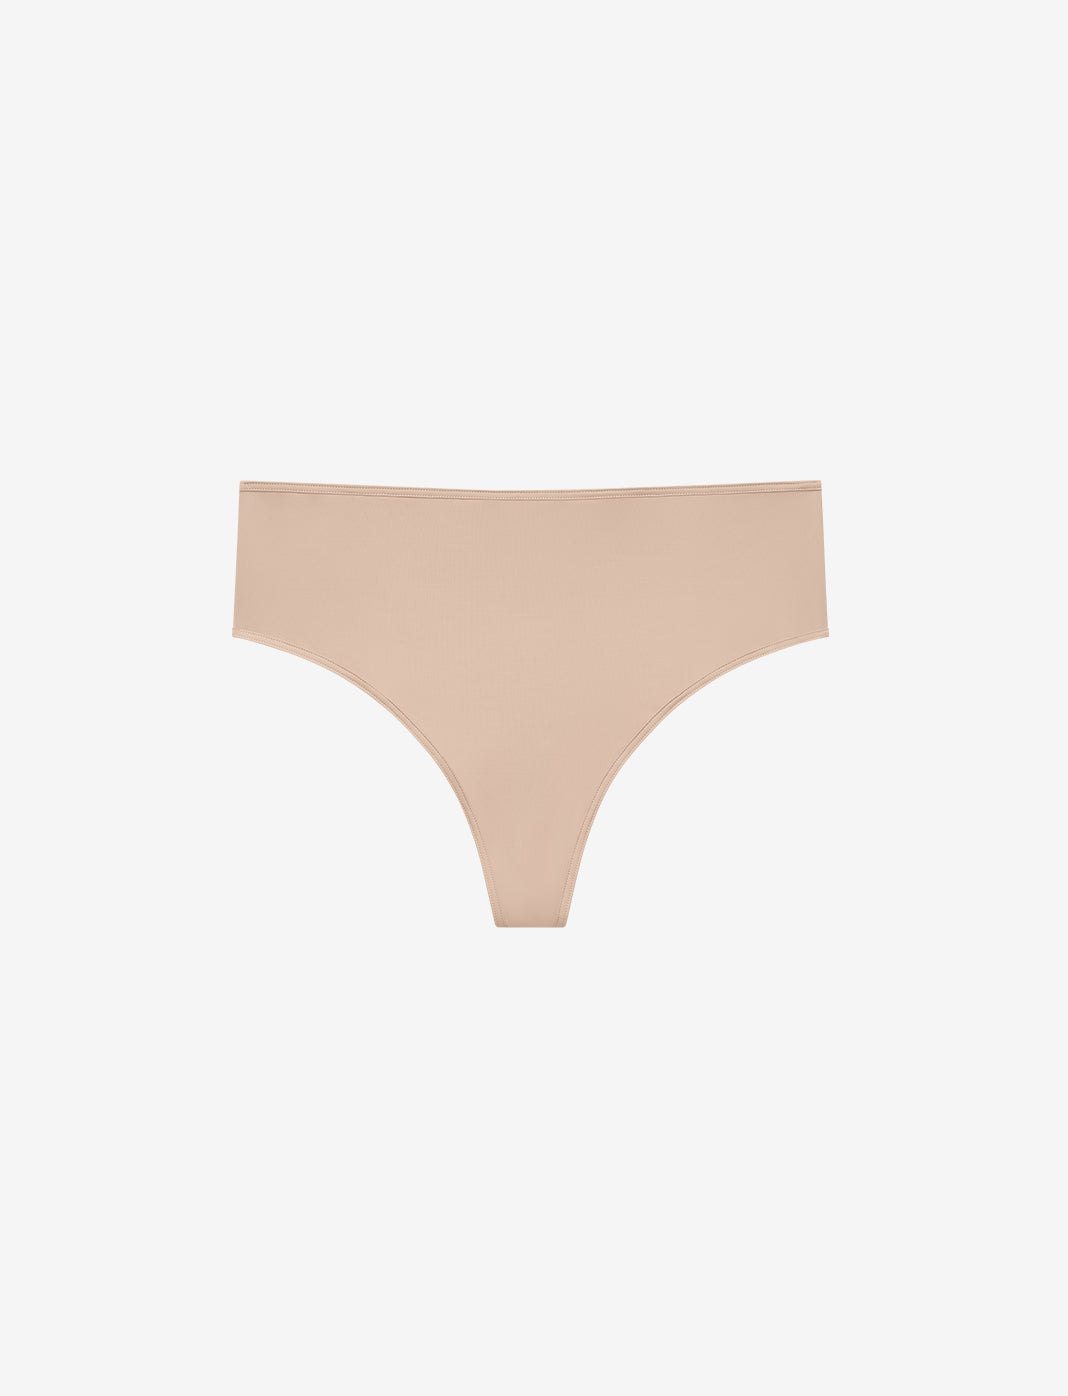 Harriet Heroic Lace High Waist Thong - WE ARE WE WEAR